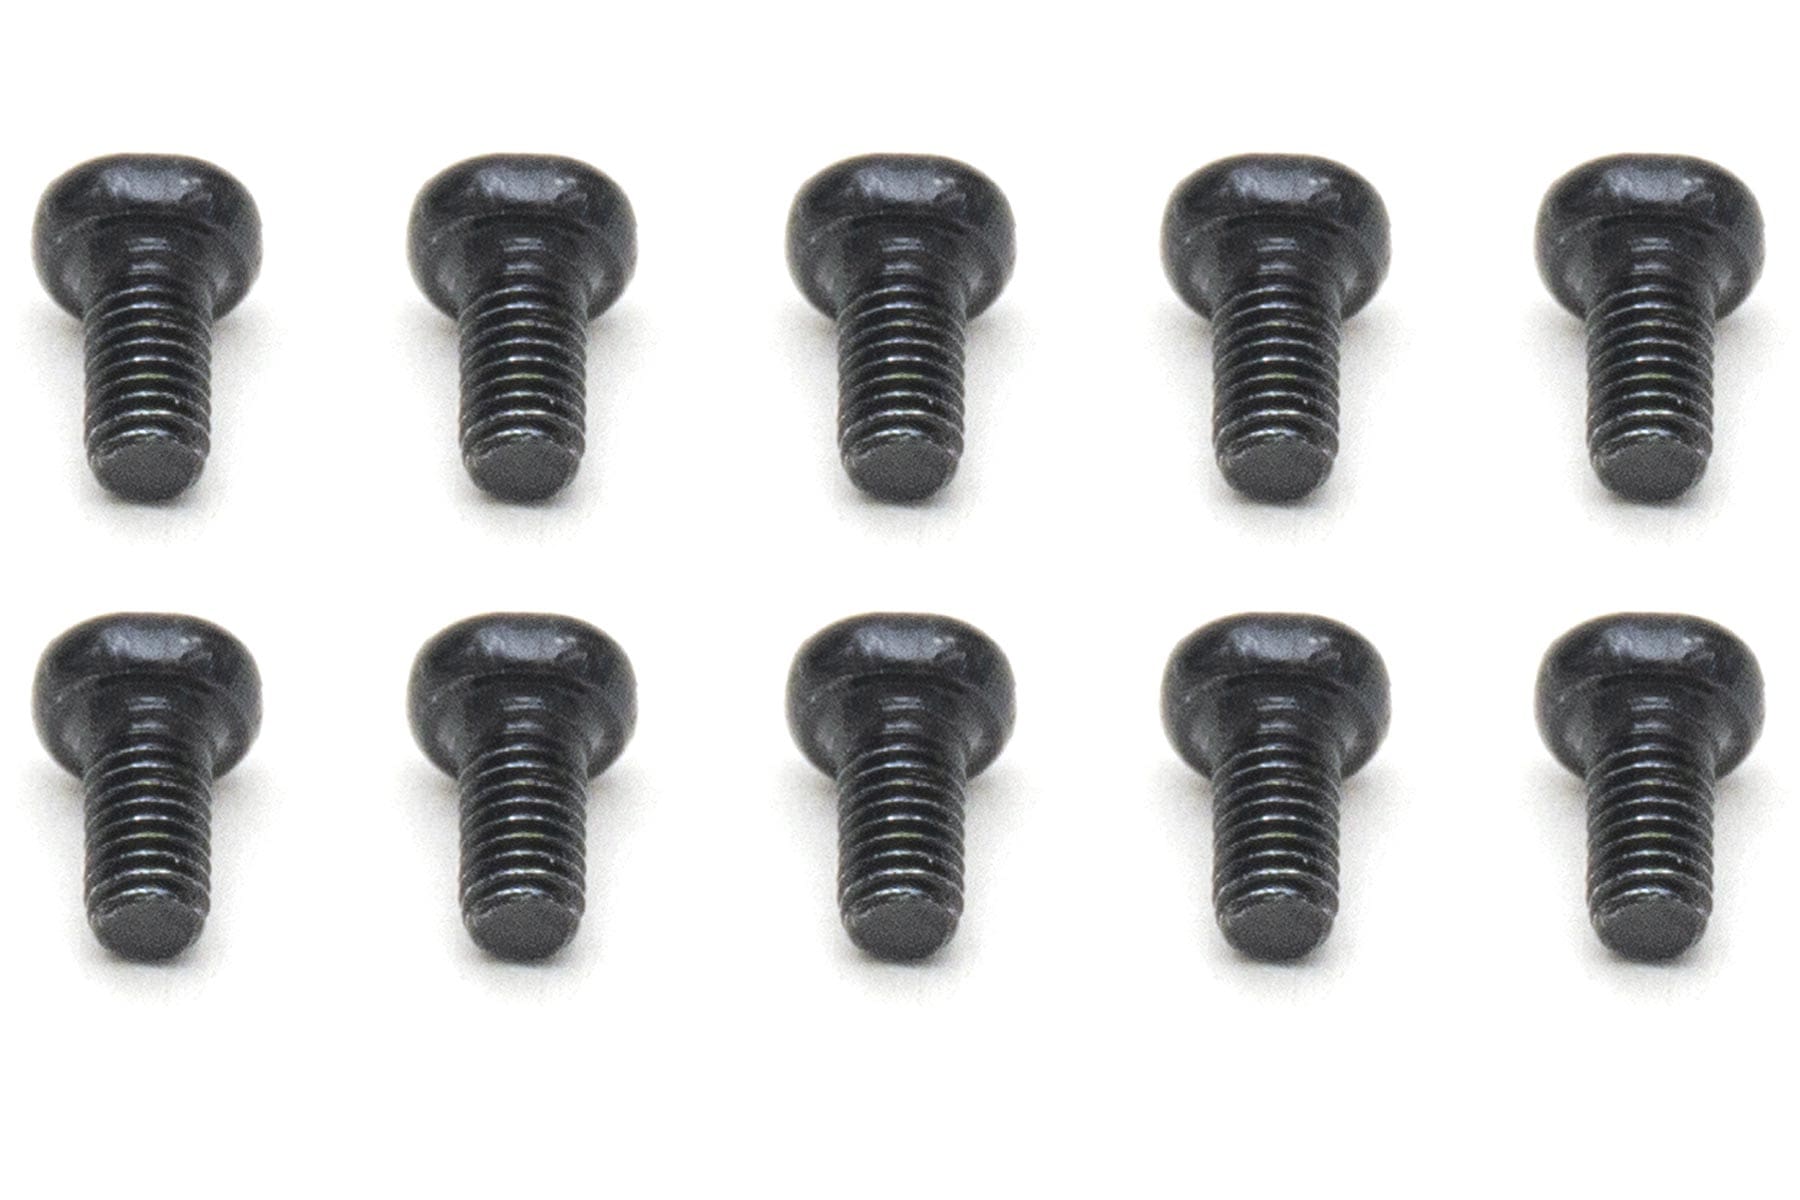 XK 1/18 Scale High Speed Truck 3x5mm Screw with Flat-Head (10 pcs) WLT-A949-44